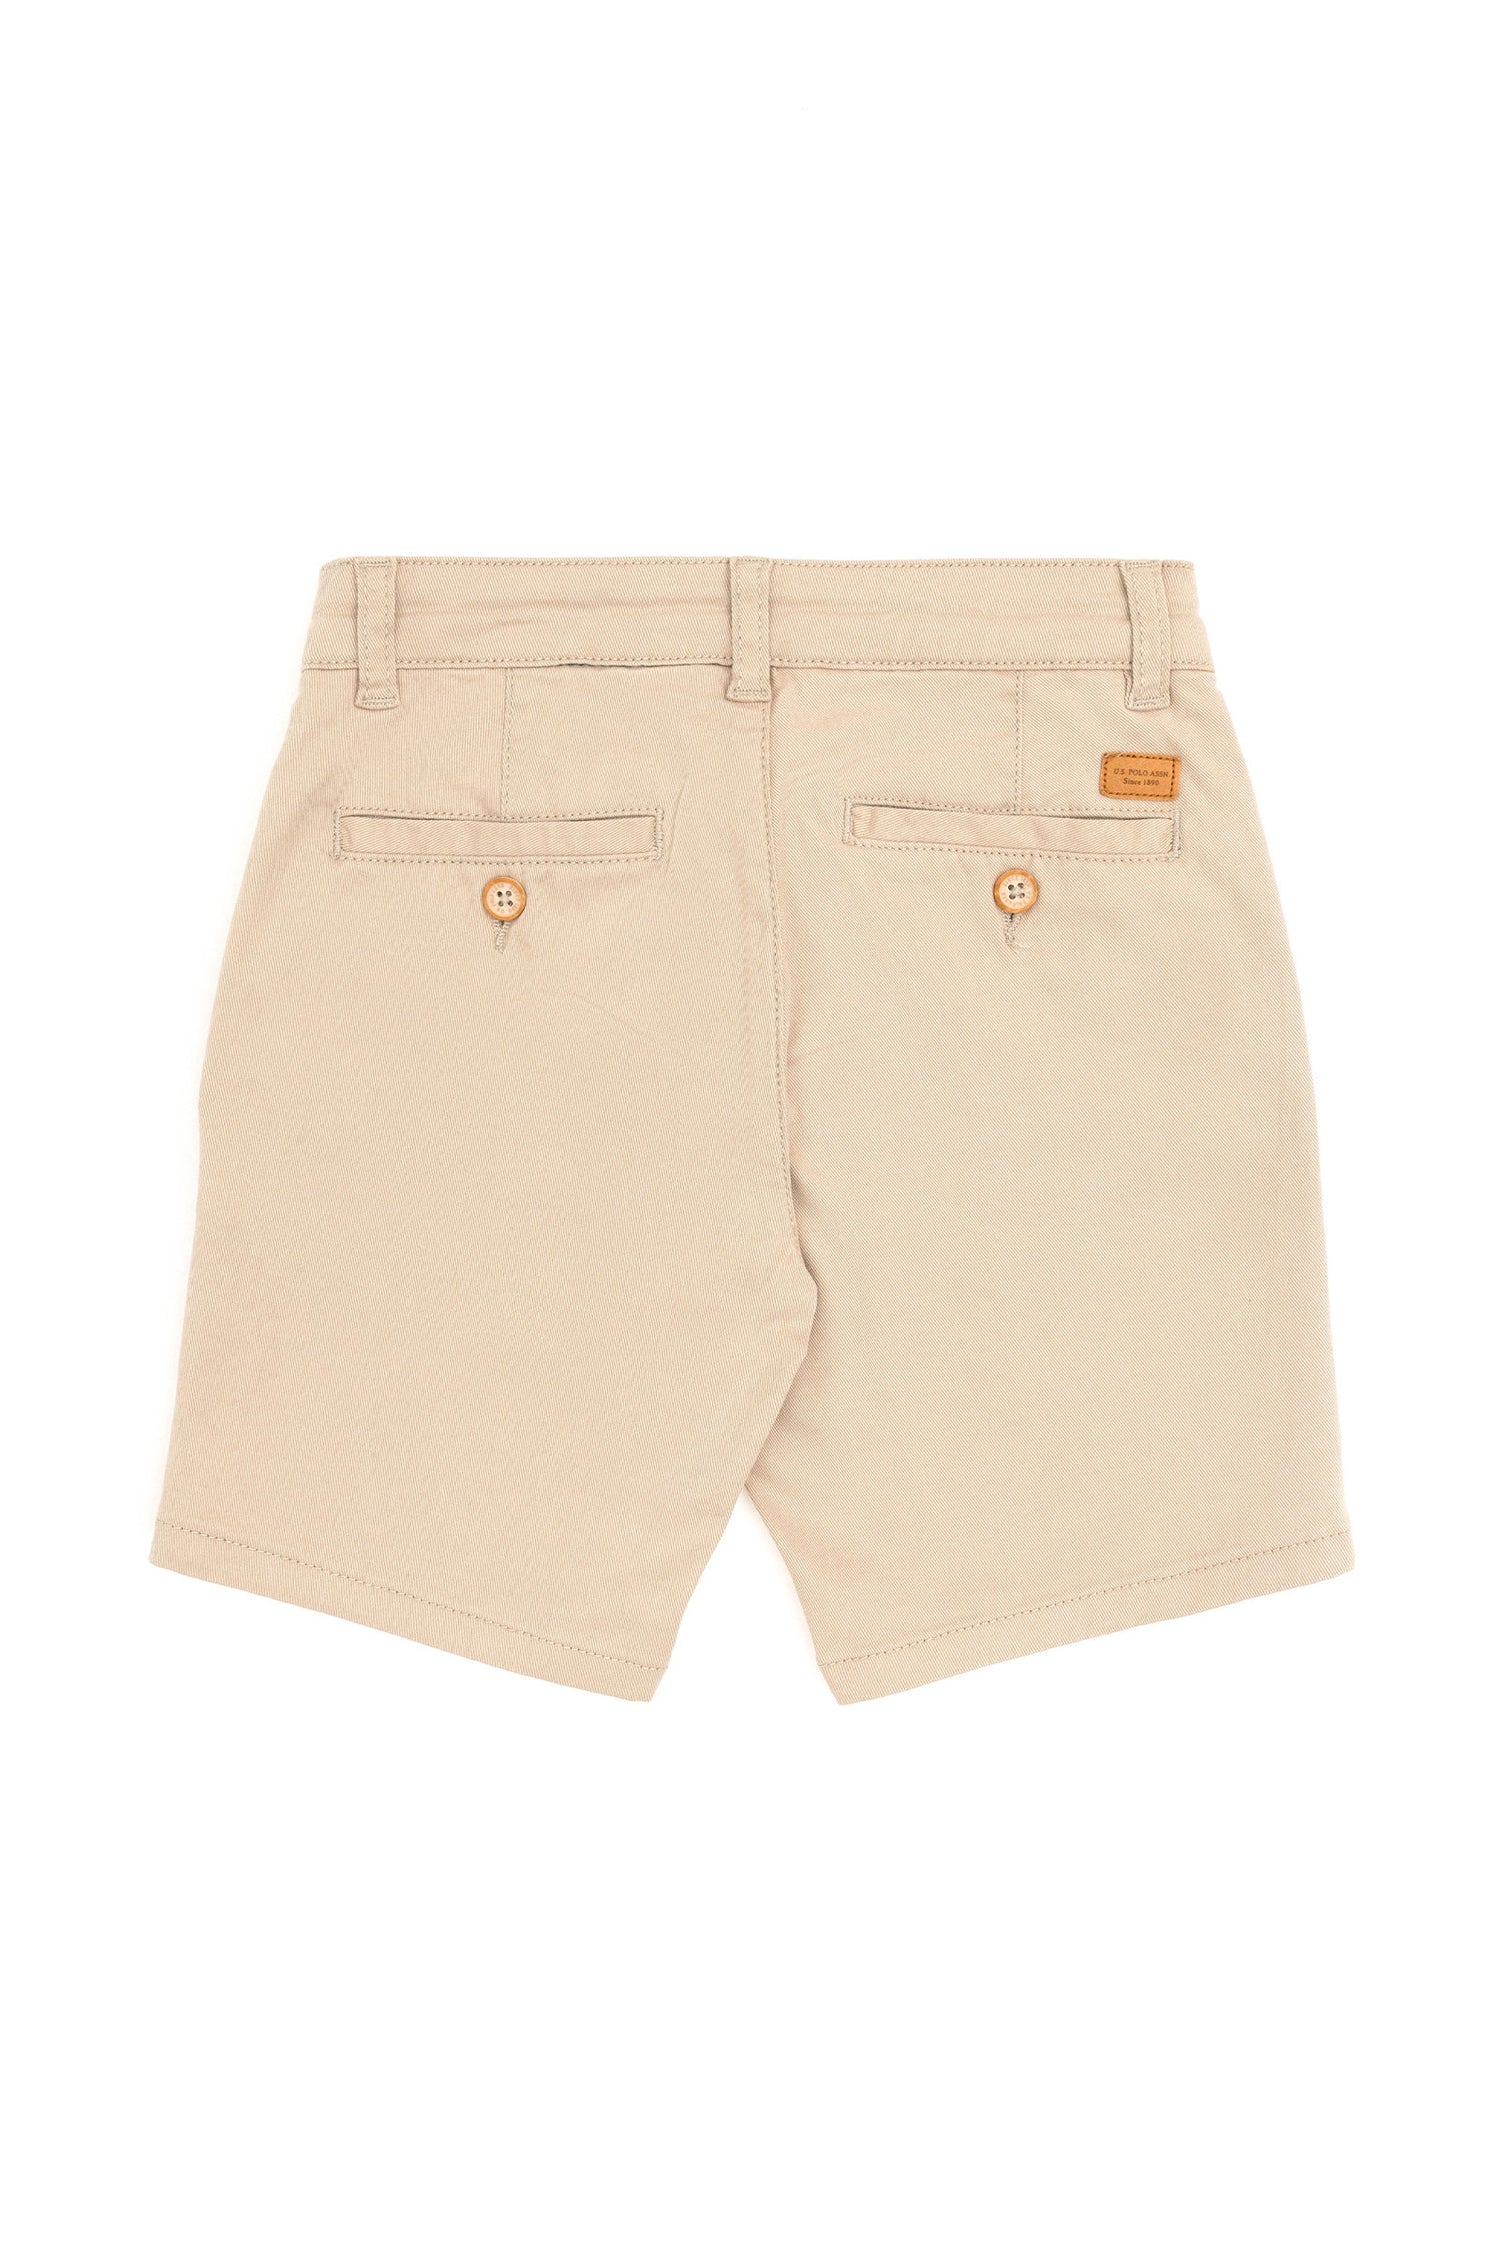 Fitted Chino Shorts_G083GL0310 1829783_VR049_03